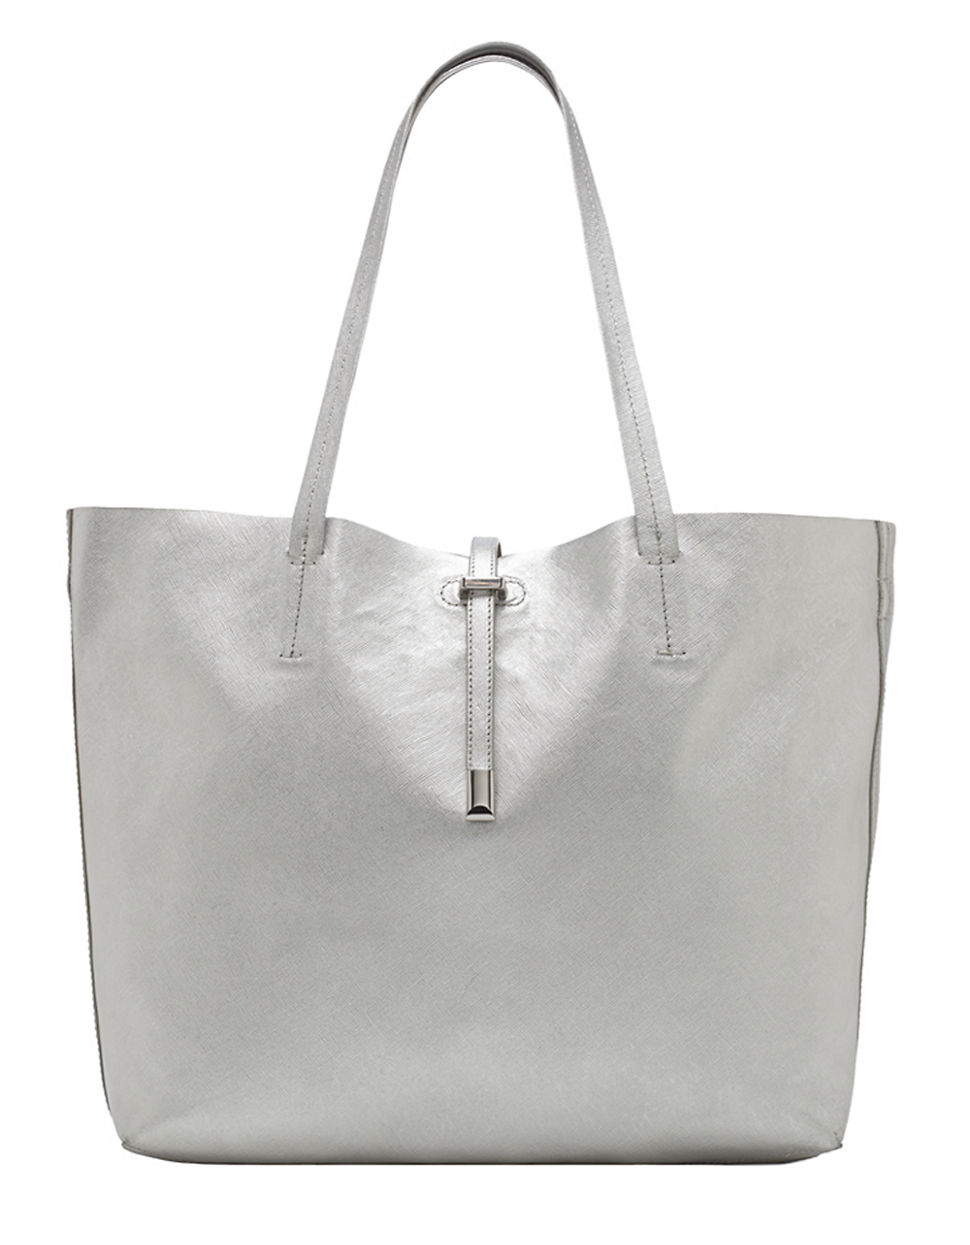 Lyst - Vince Camuto Leila Leather Tote Bag in Metallic